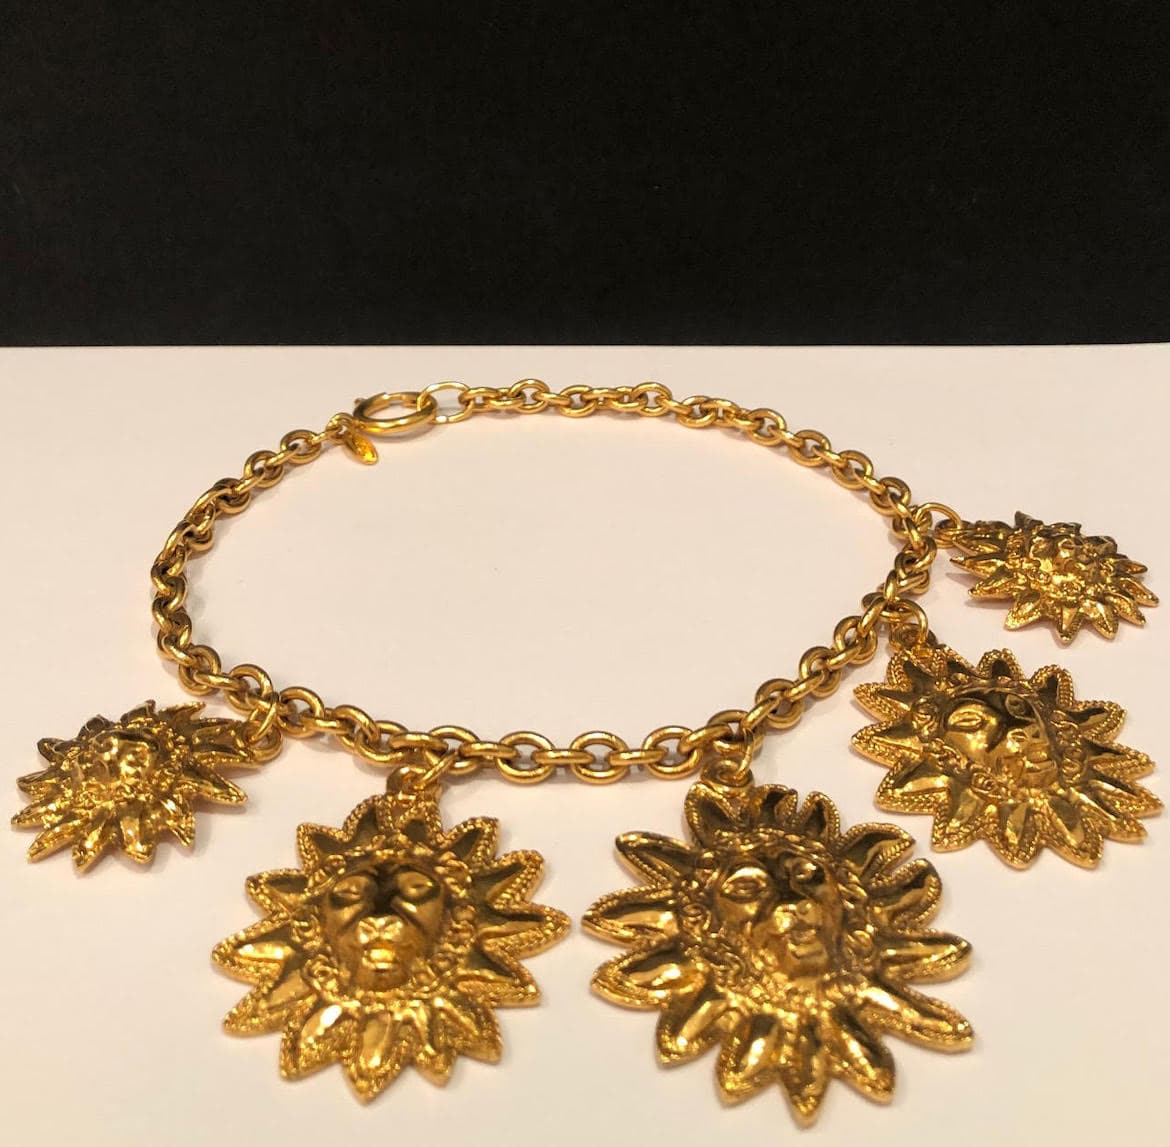 Chanel Gold Tone Heavy Charm Bracelet from 1980's (SOLD) - The